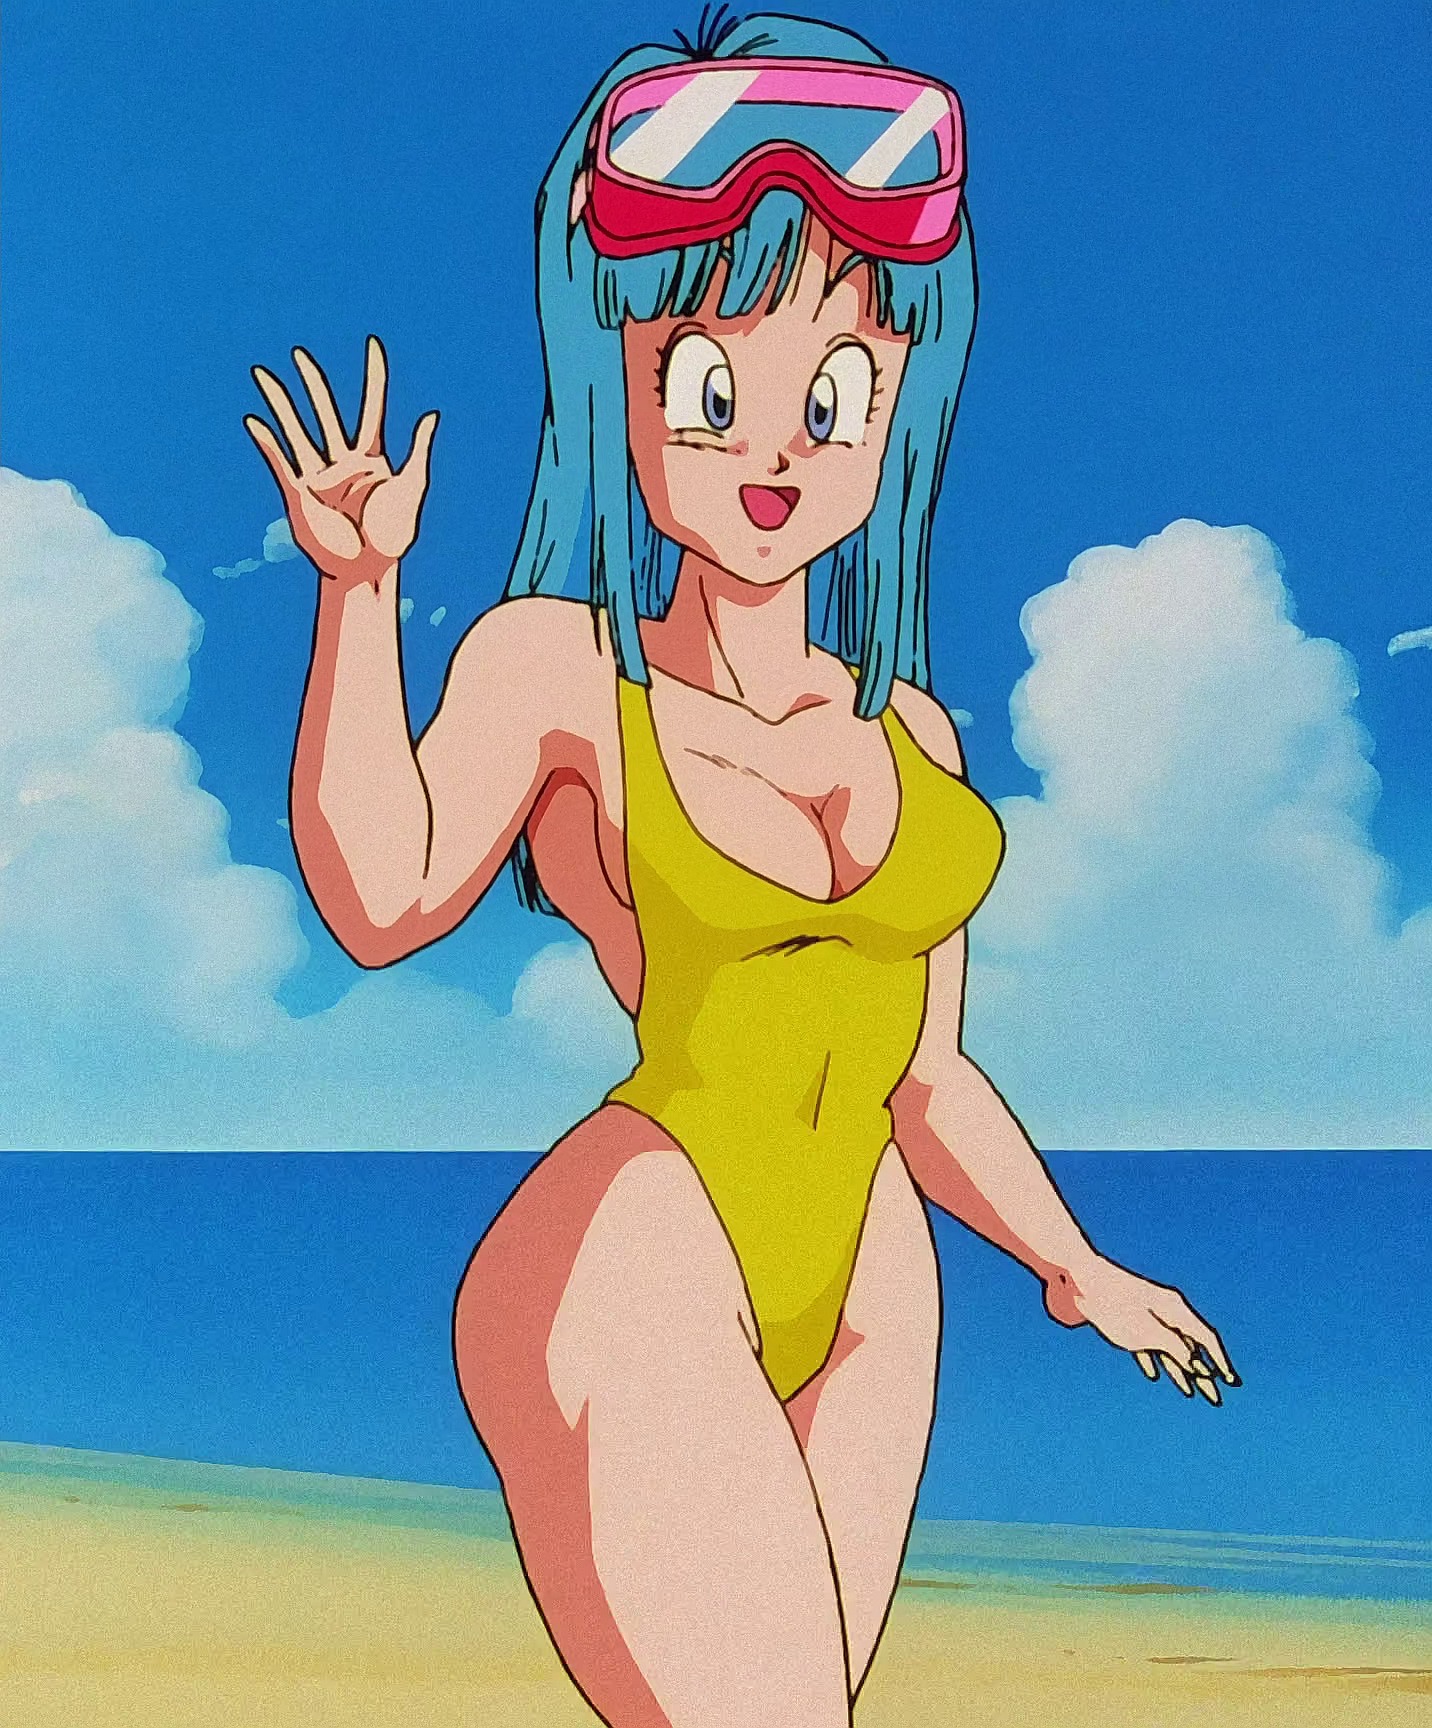 “Screenshots of Maron from Dragon Ball Z. Albums https://t.co/H3btn7s1Bk or...